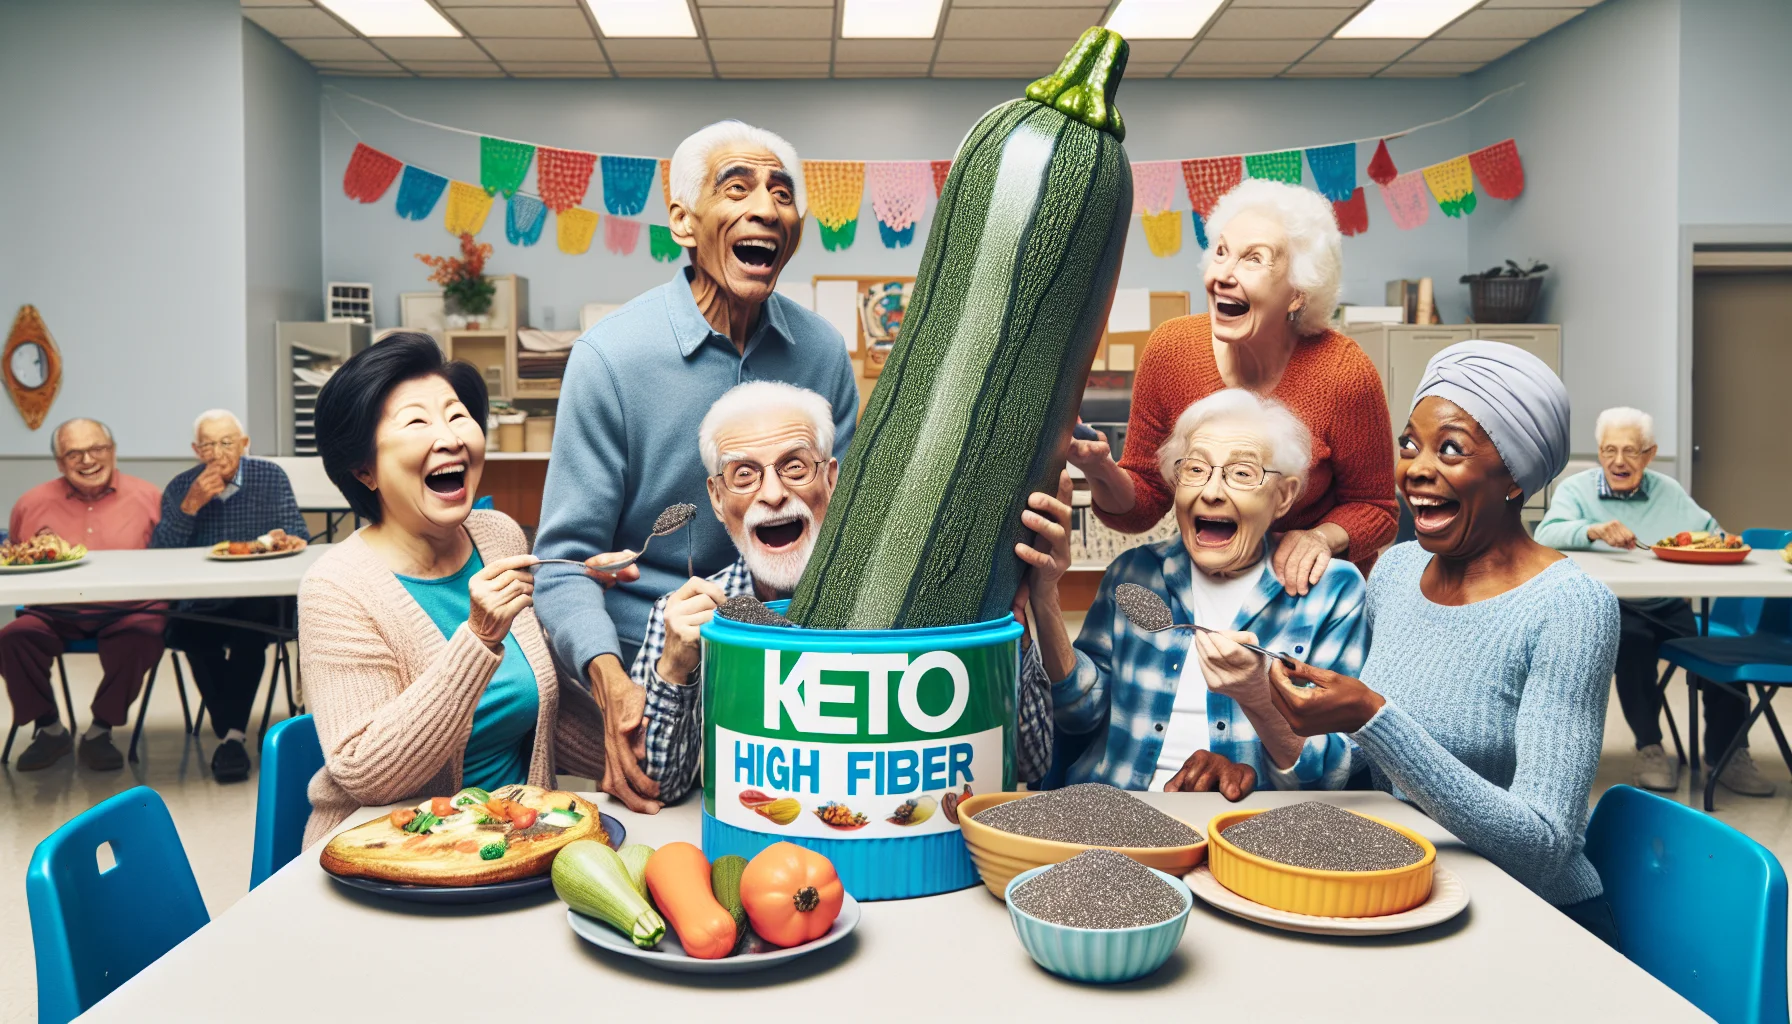 Imagine a humorous and realistic scene set in a lively senior community center. A group of old friends, consisting of an East Asian woman, a Middle Eastern man, a Hispanic woman, and a Black man, are having a 'keto high fiber' potluck. This funny assortment of keto-friendly foods exhibit absurdly large proportions, like a zucchini the size of a baseball bat and a bowlful of chia seeds as big as an umbrella. They're all laughing heartily and making exaggerated attempts to eat these giant foods, unaware of curious onlooking seniors peeking from behind the corners, their faces portraying a mix of surprise and amusement.